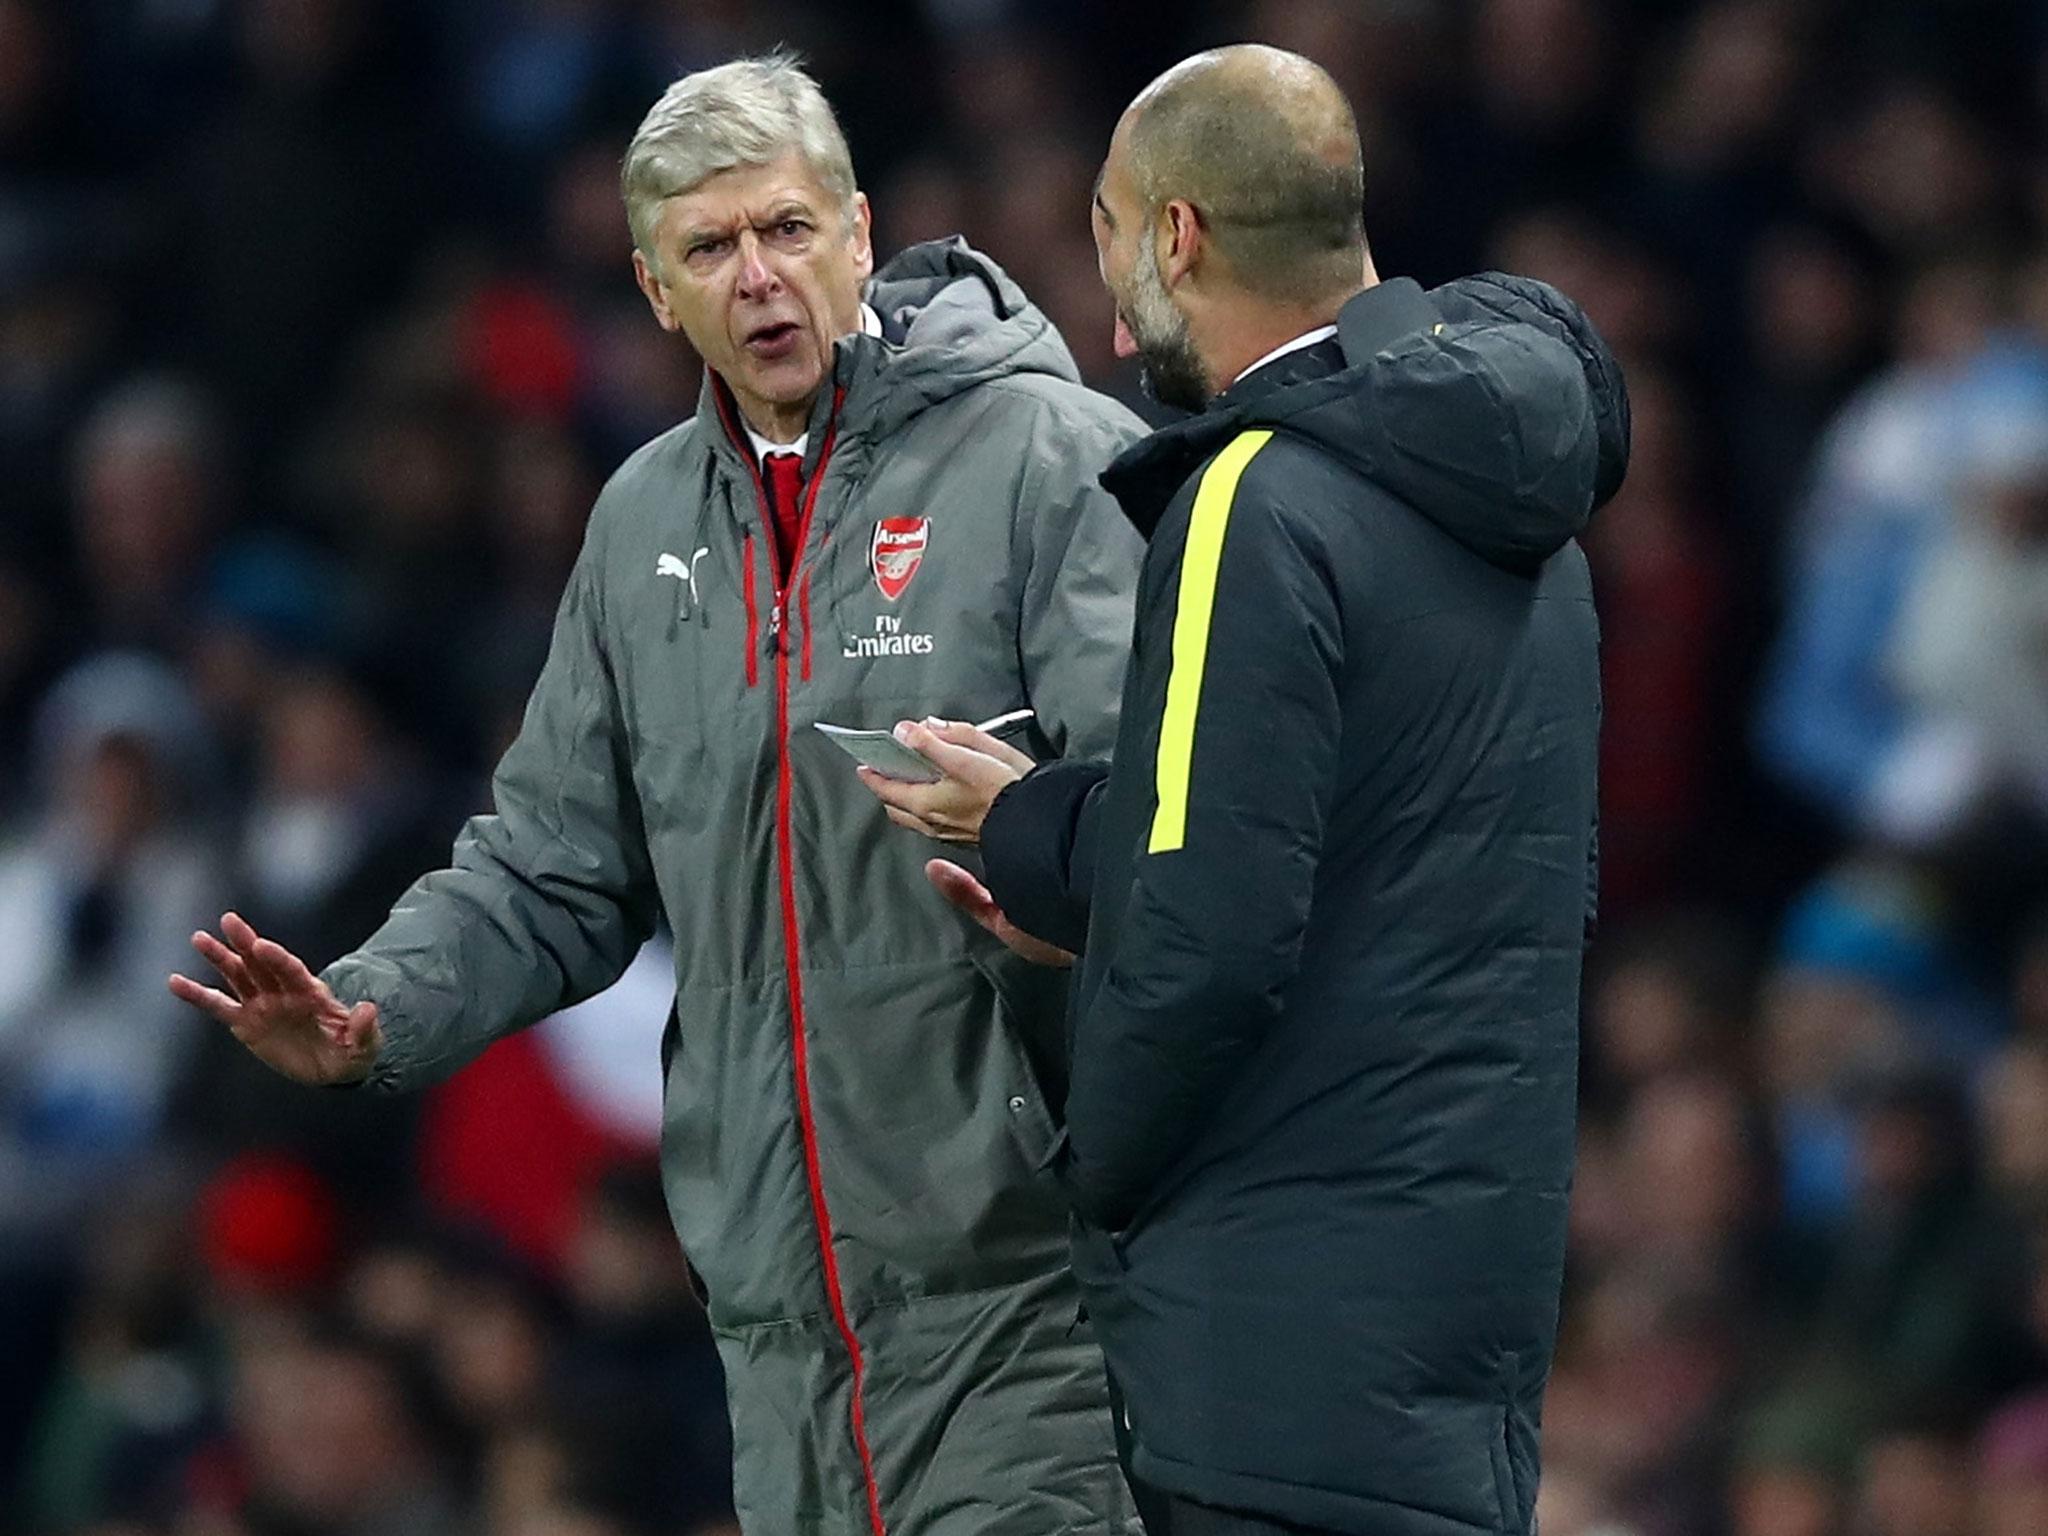 Arsene Wenger blamed two marginal offside calls for Arsenal's 2-1 defeat by Manchester City